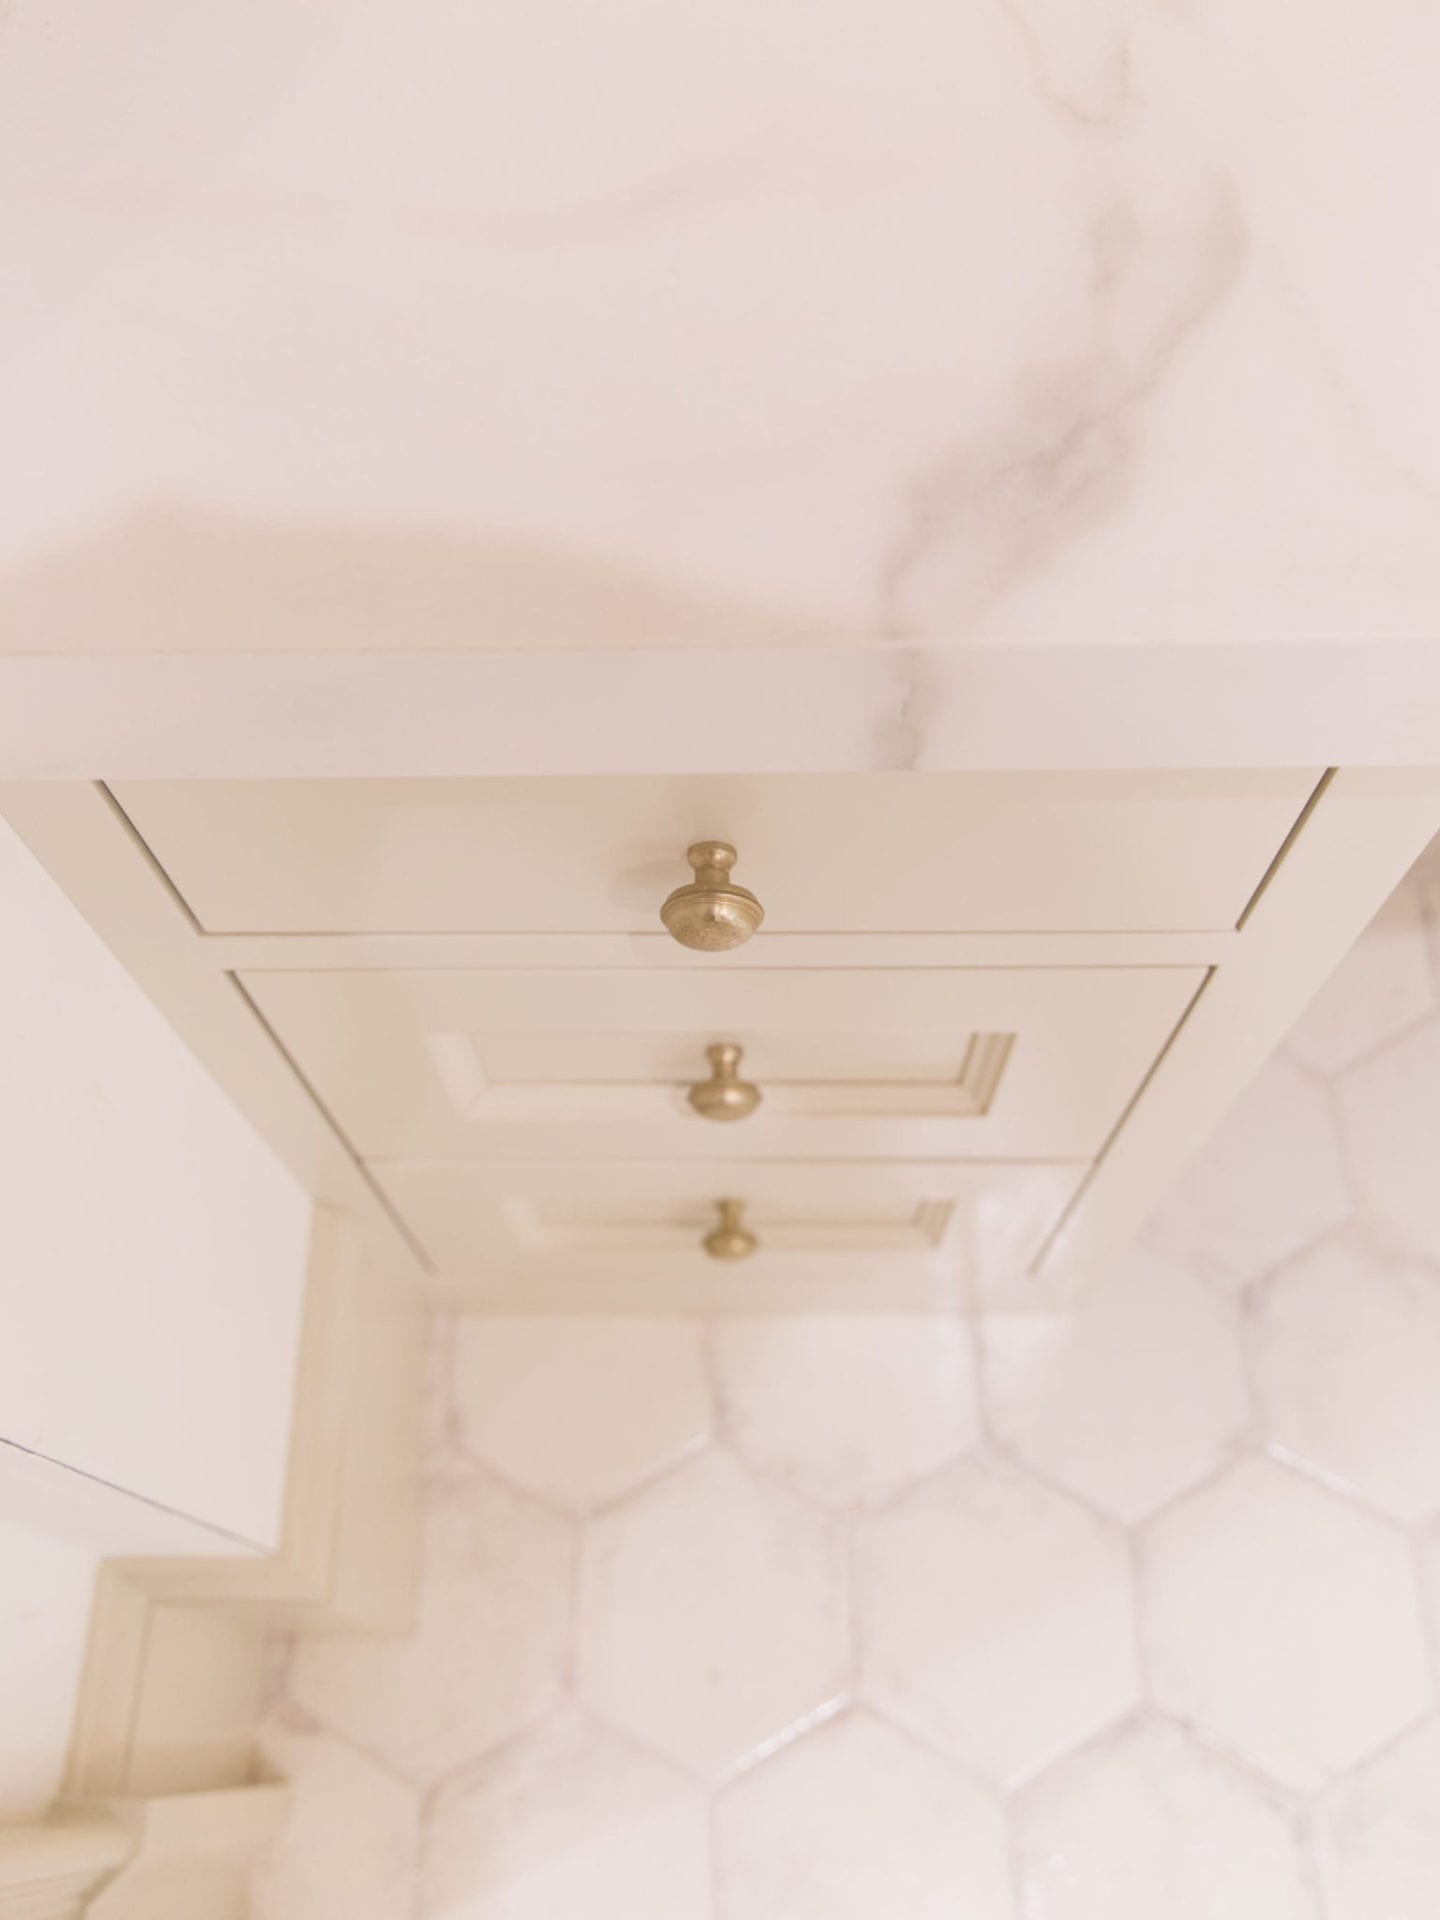 Hammered Hardware in bronze gold with Sherwin Williams Accessible Beige painted cabinets.